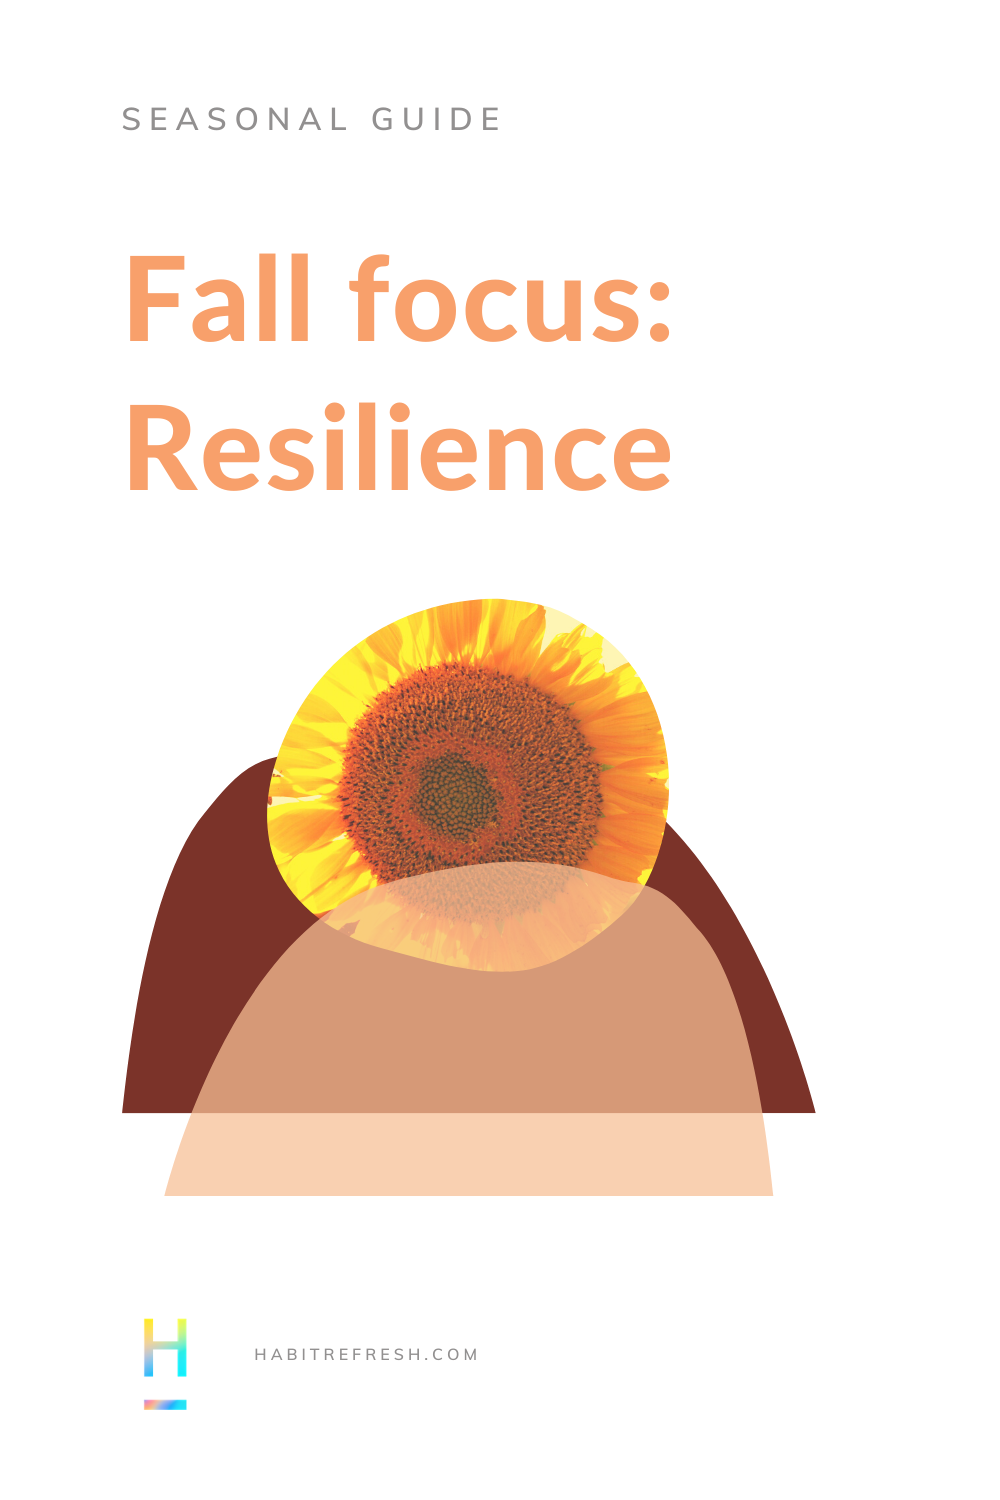 Fall focus: Resilience